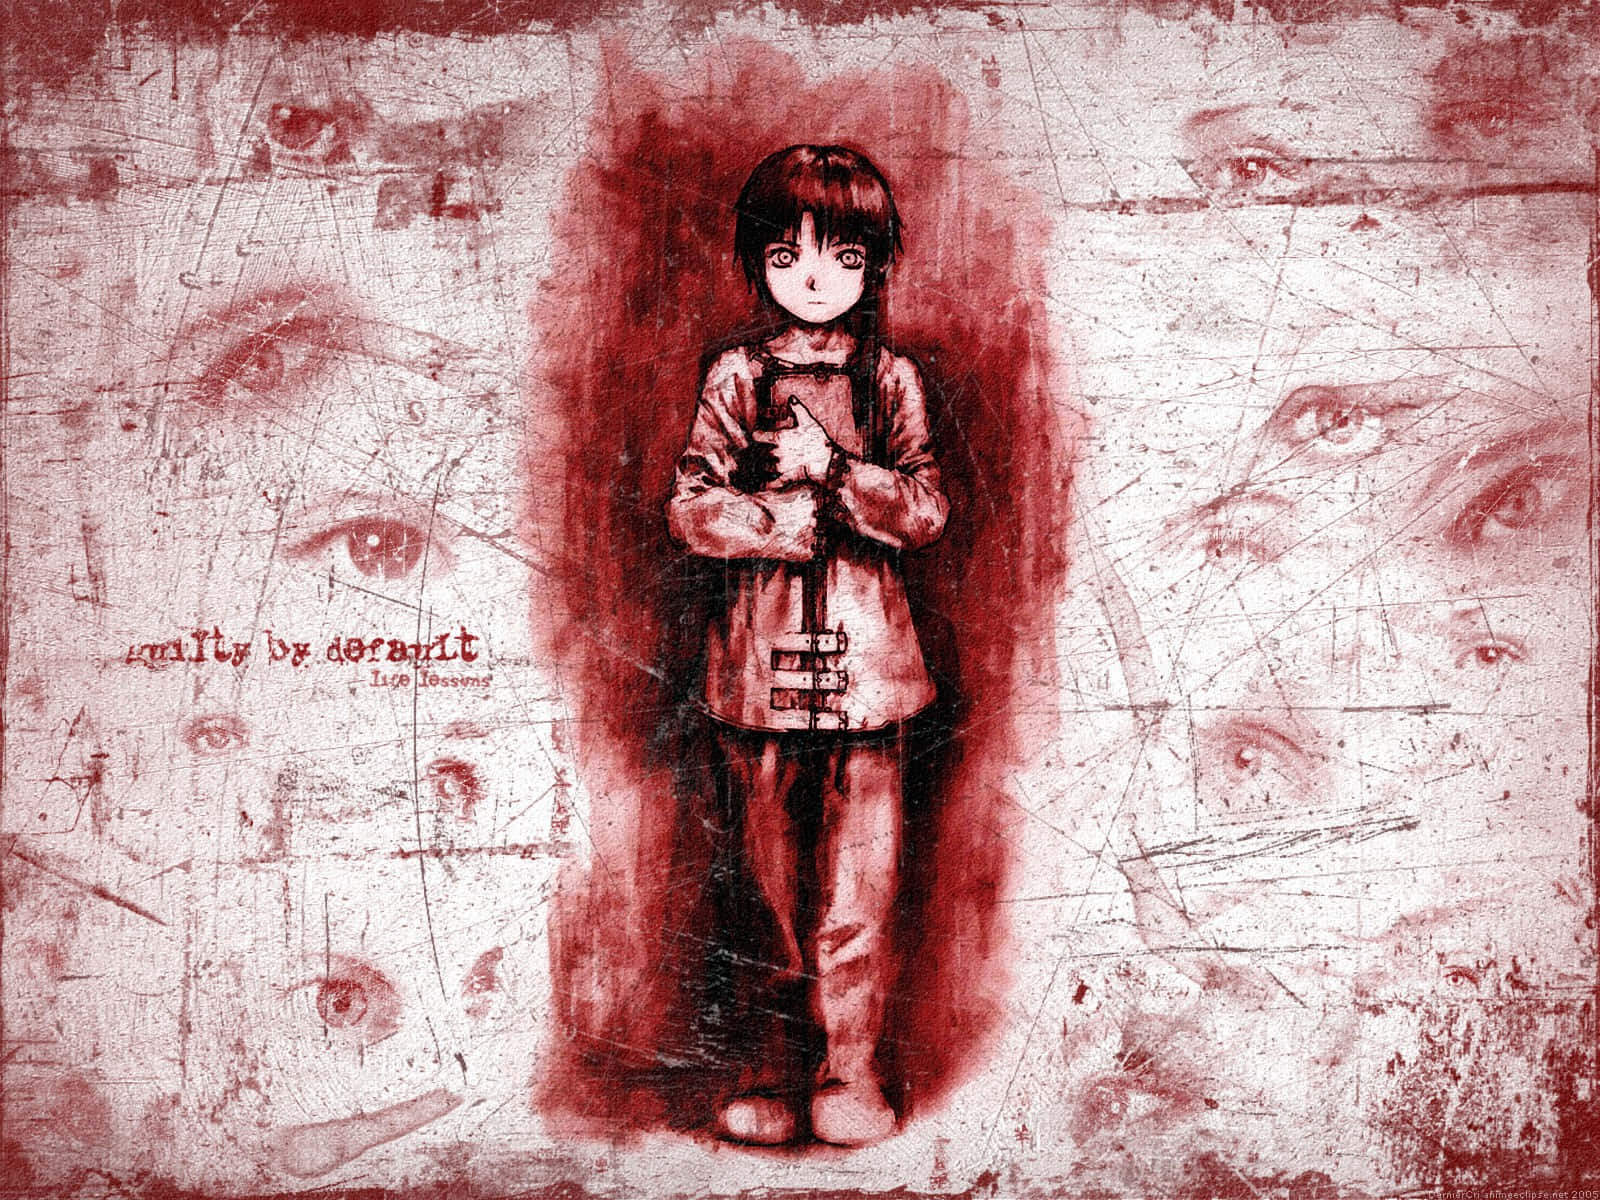 Serial Experiments: Lain - A Science-fiction Anime Show Background